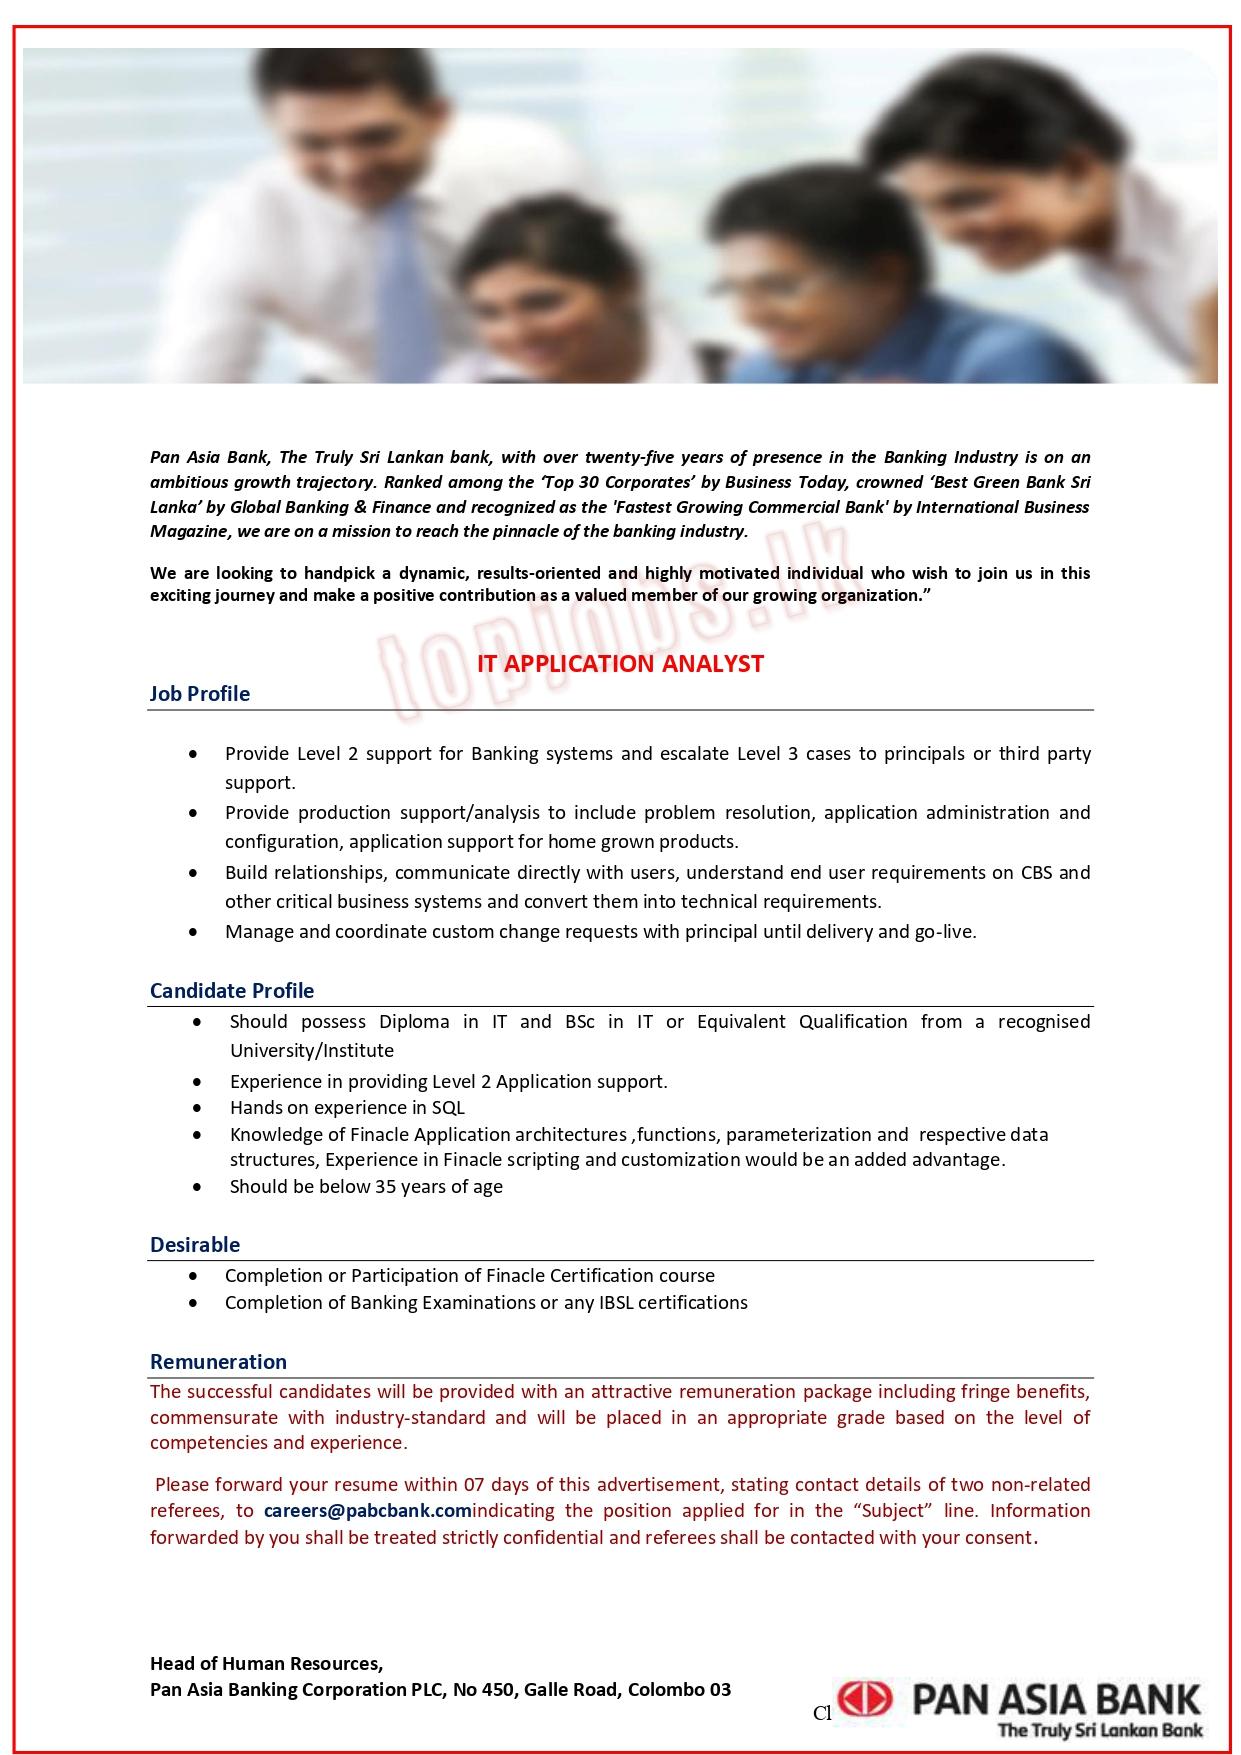 IT Application Analyst Vacancy in Pan Asia Banking Corporation